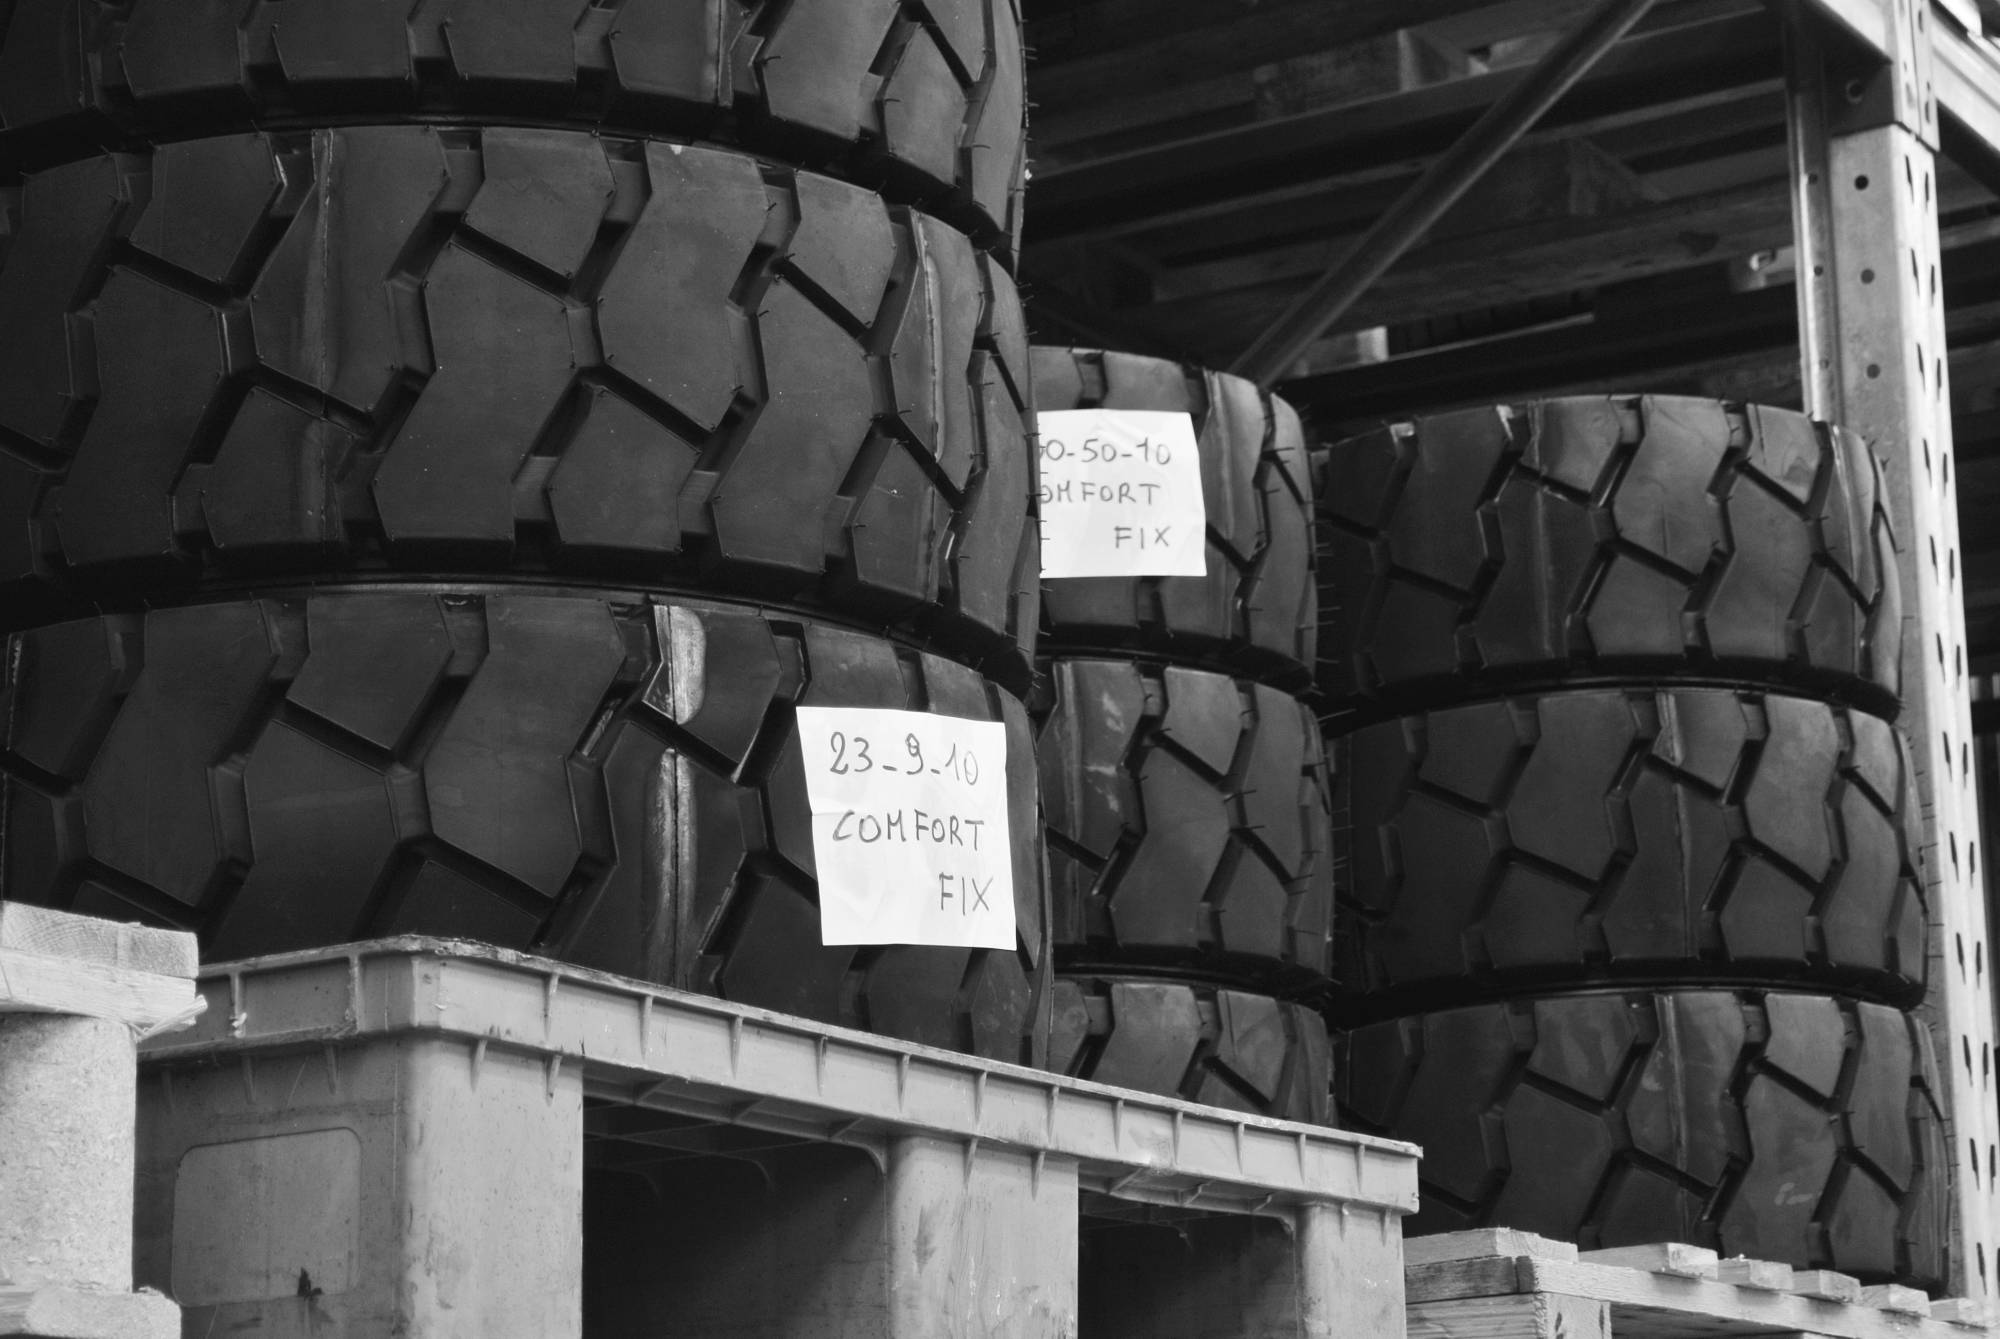  Trelleborg Superelastic tyres are designed for material handling environments. 